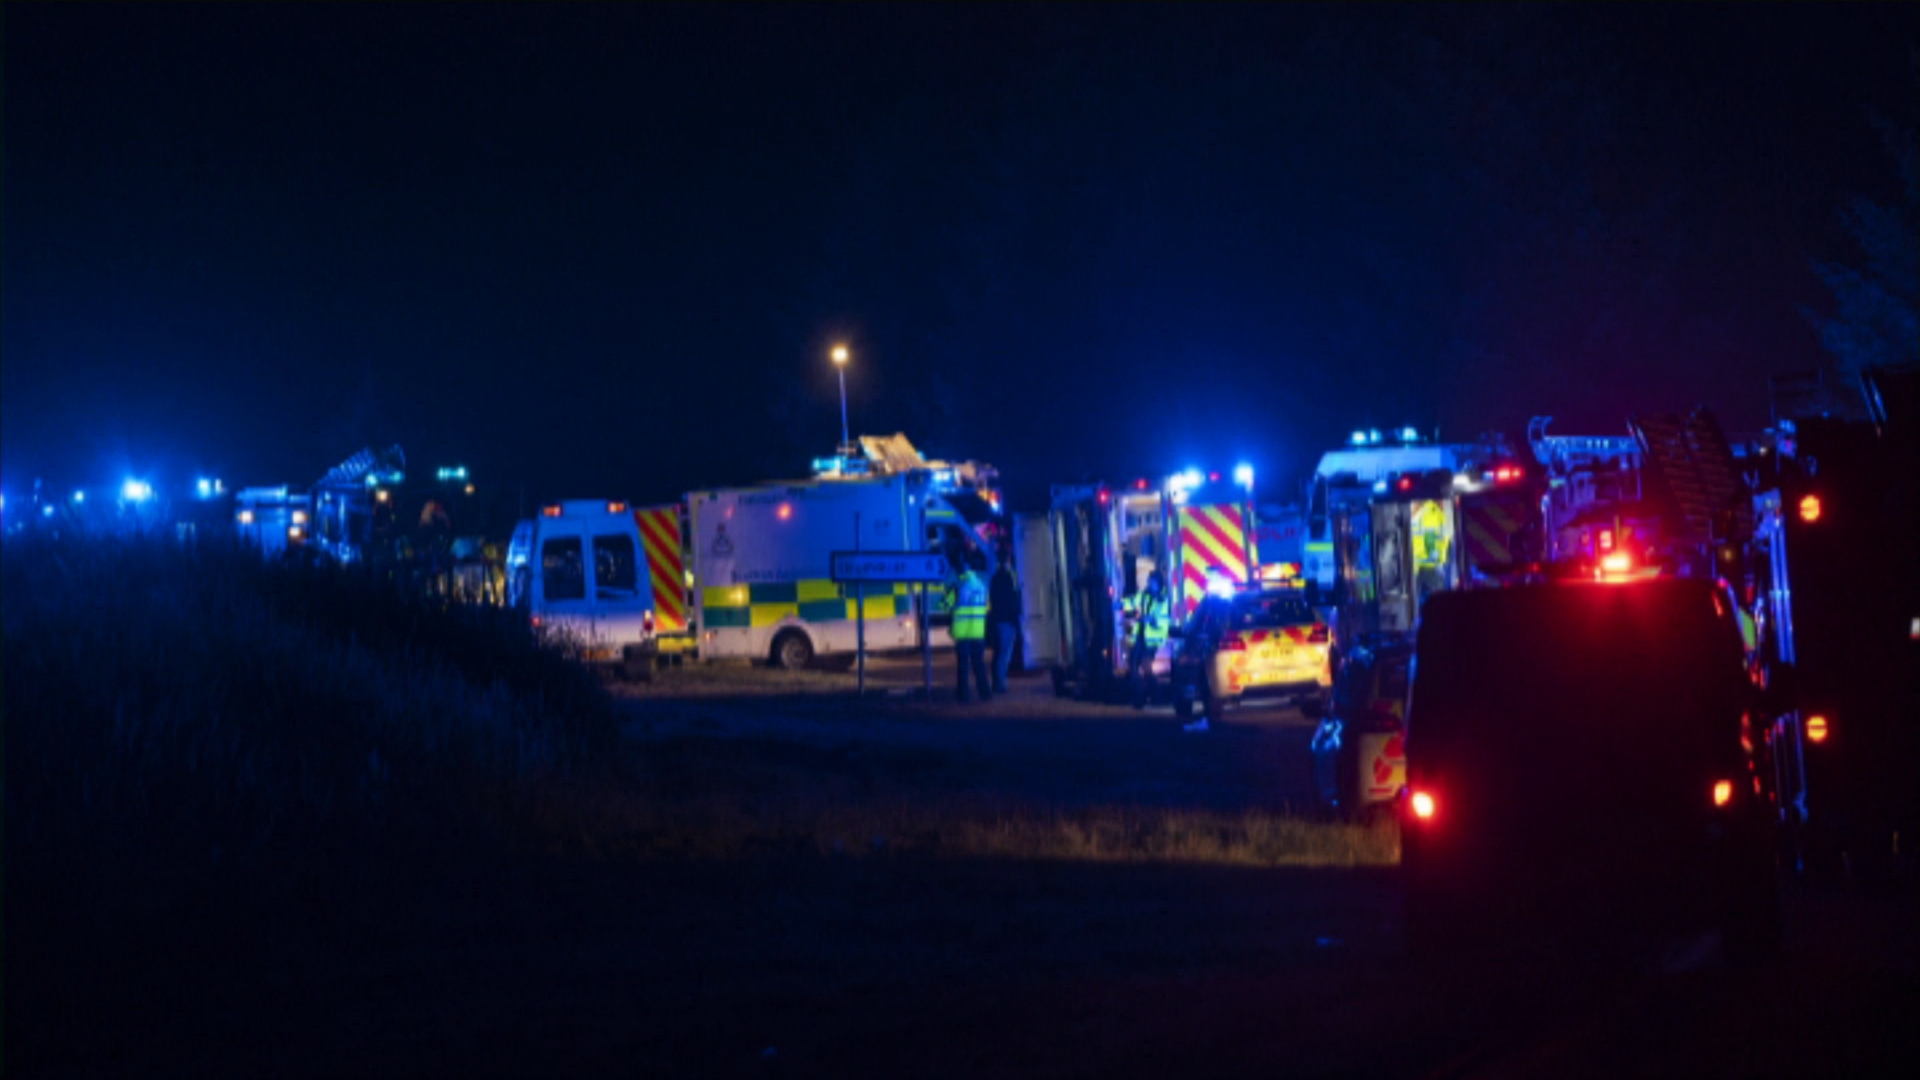 Alfredo Ciociola was driving a Fiat minibus when he collided with a Nissan SUV on the wrong side of the road at the Drummuir junction on the A96 near Keith in Morayshire.

